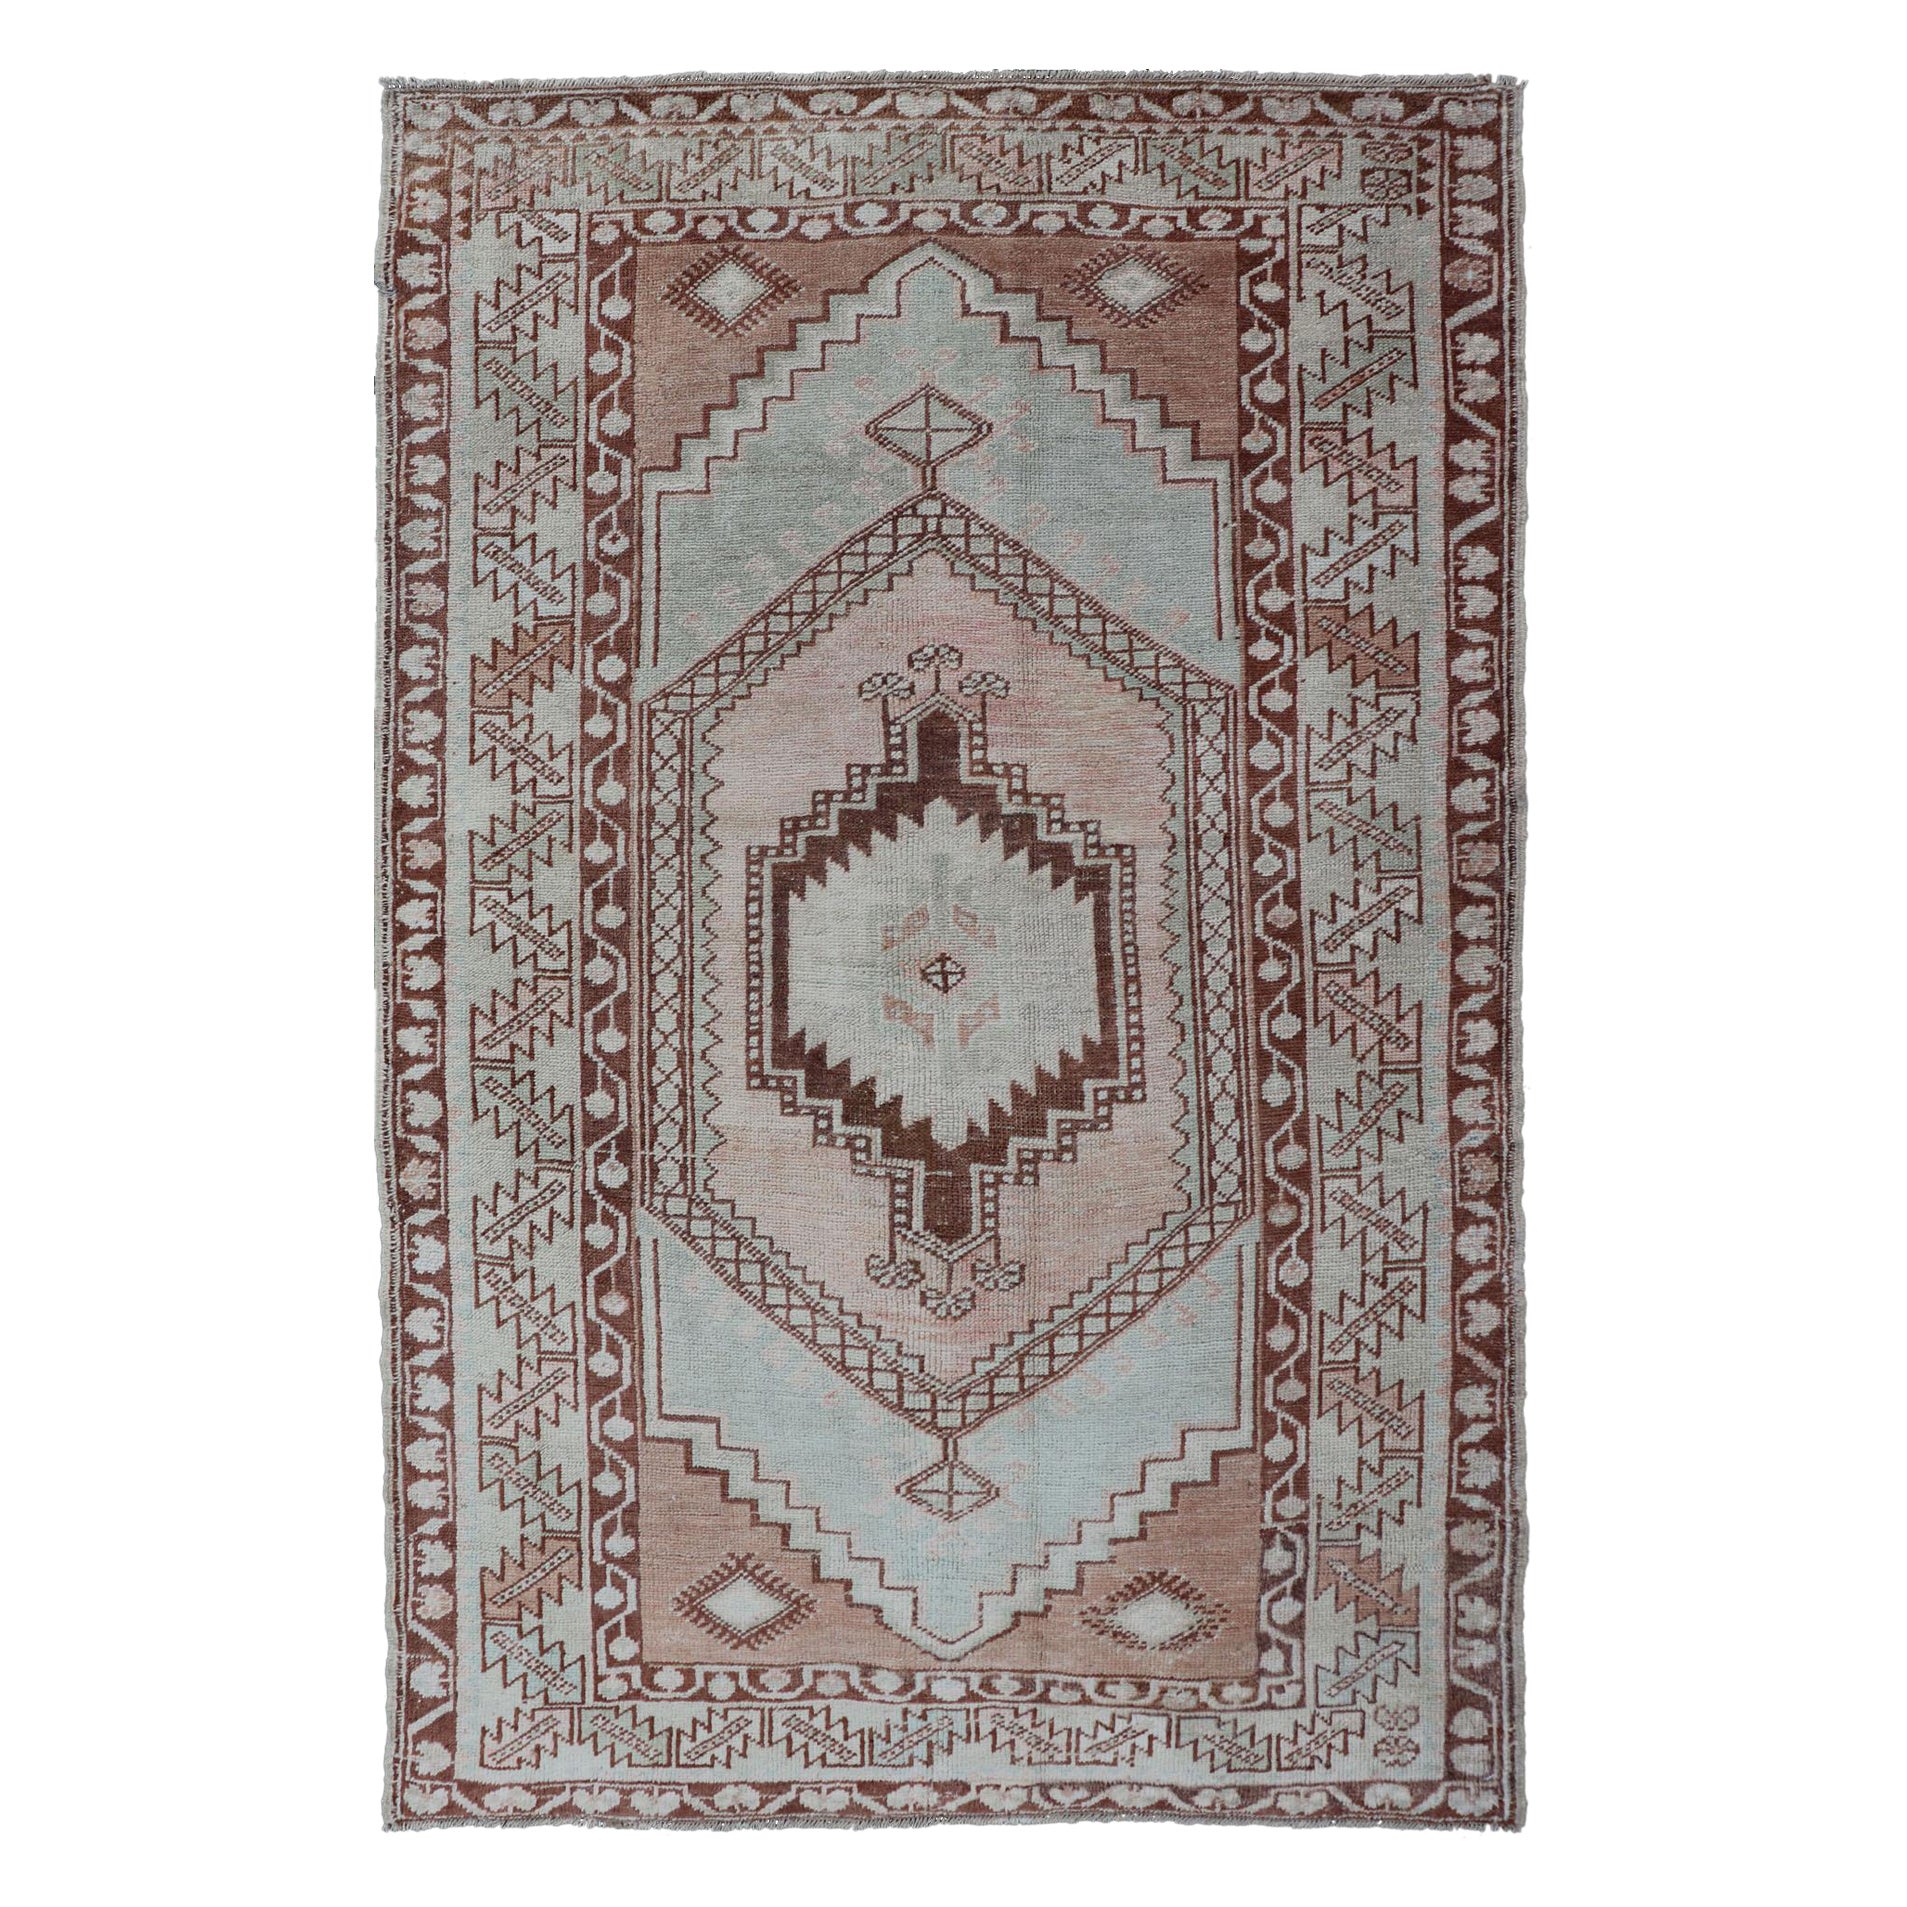 Vintage Turkish Oushak Rug with Traditional Design in Muted Blue, Brown, Salmon